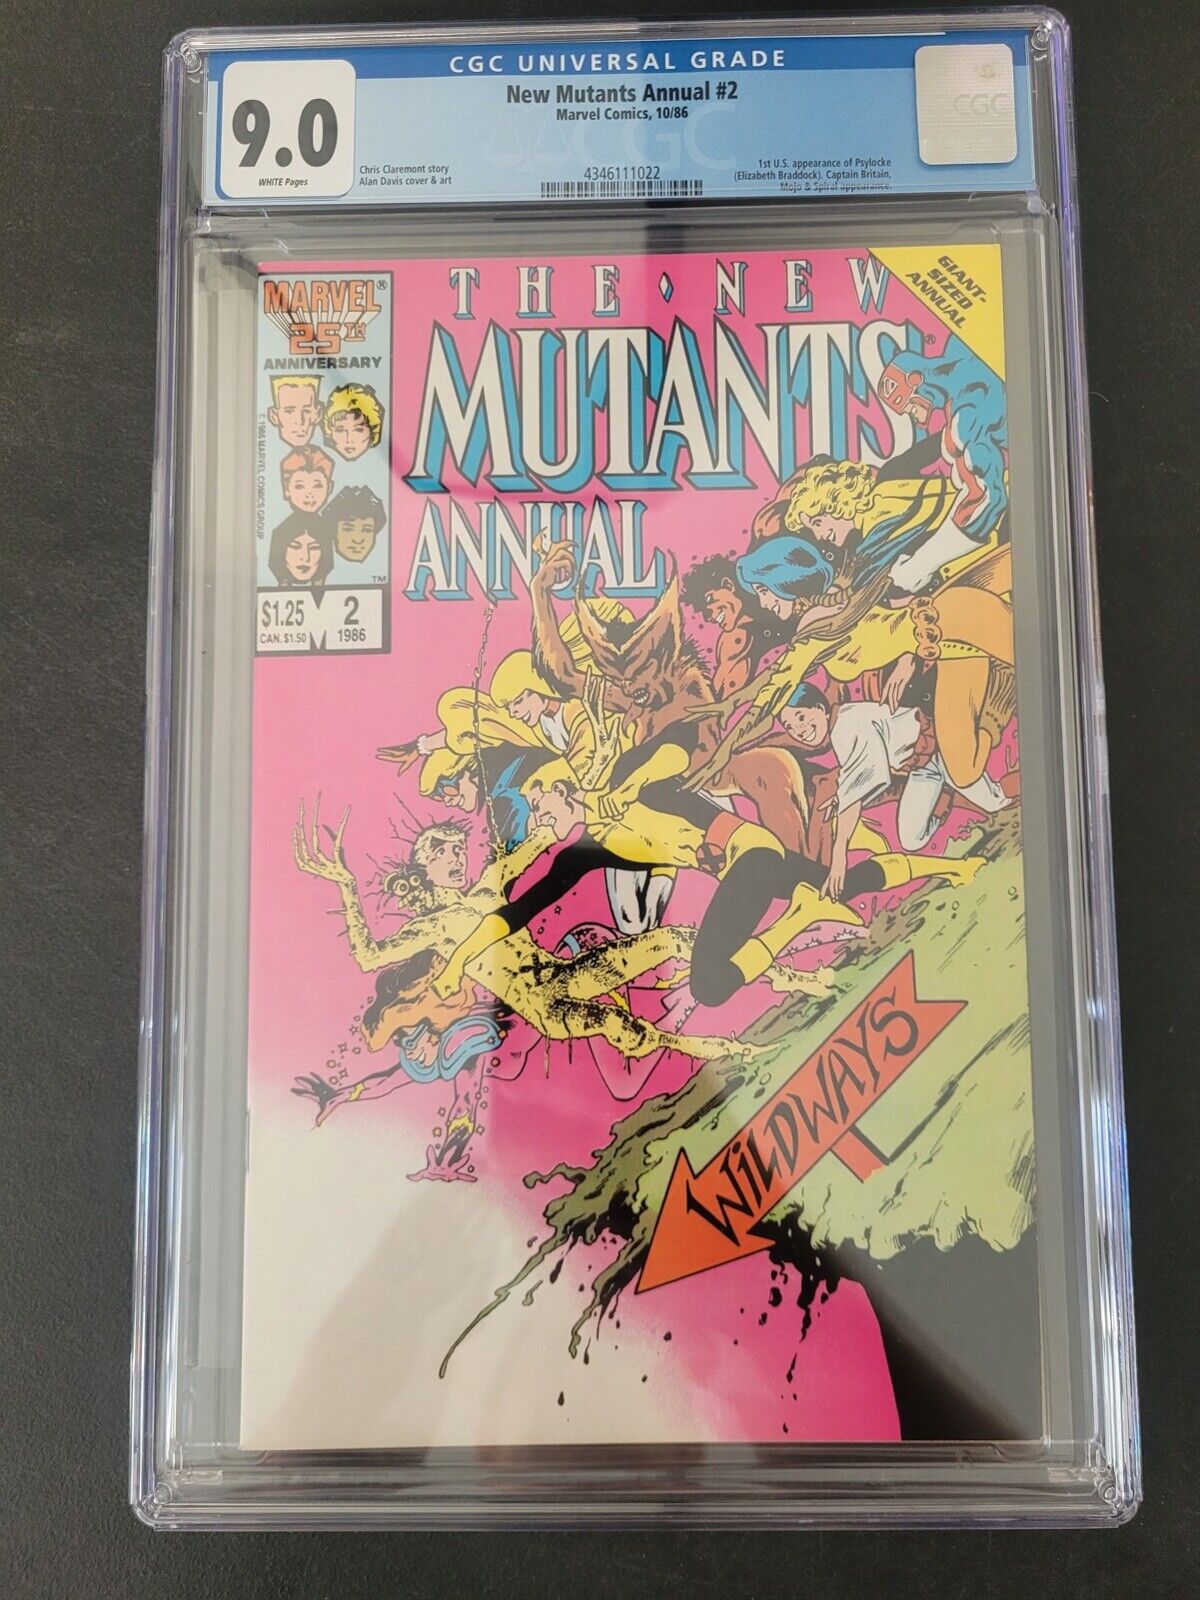 THE NEW MUTANTS ANNUAL #2 CGC 9.0 GRADED 1986 1ST APPEARANCE OF PSYLOCKE in US